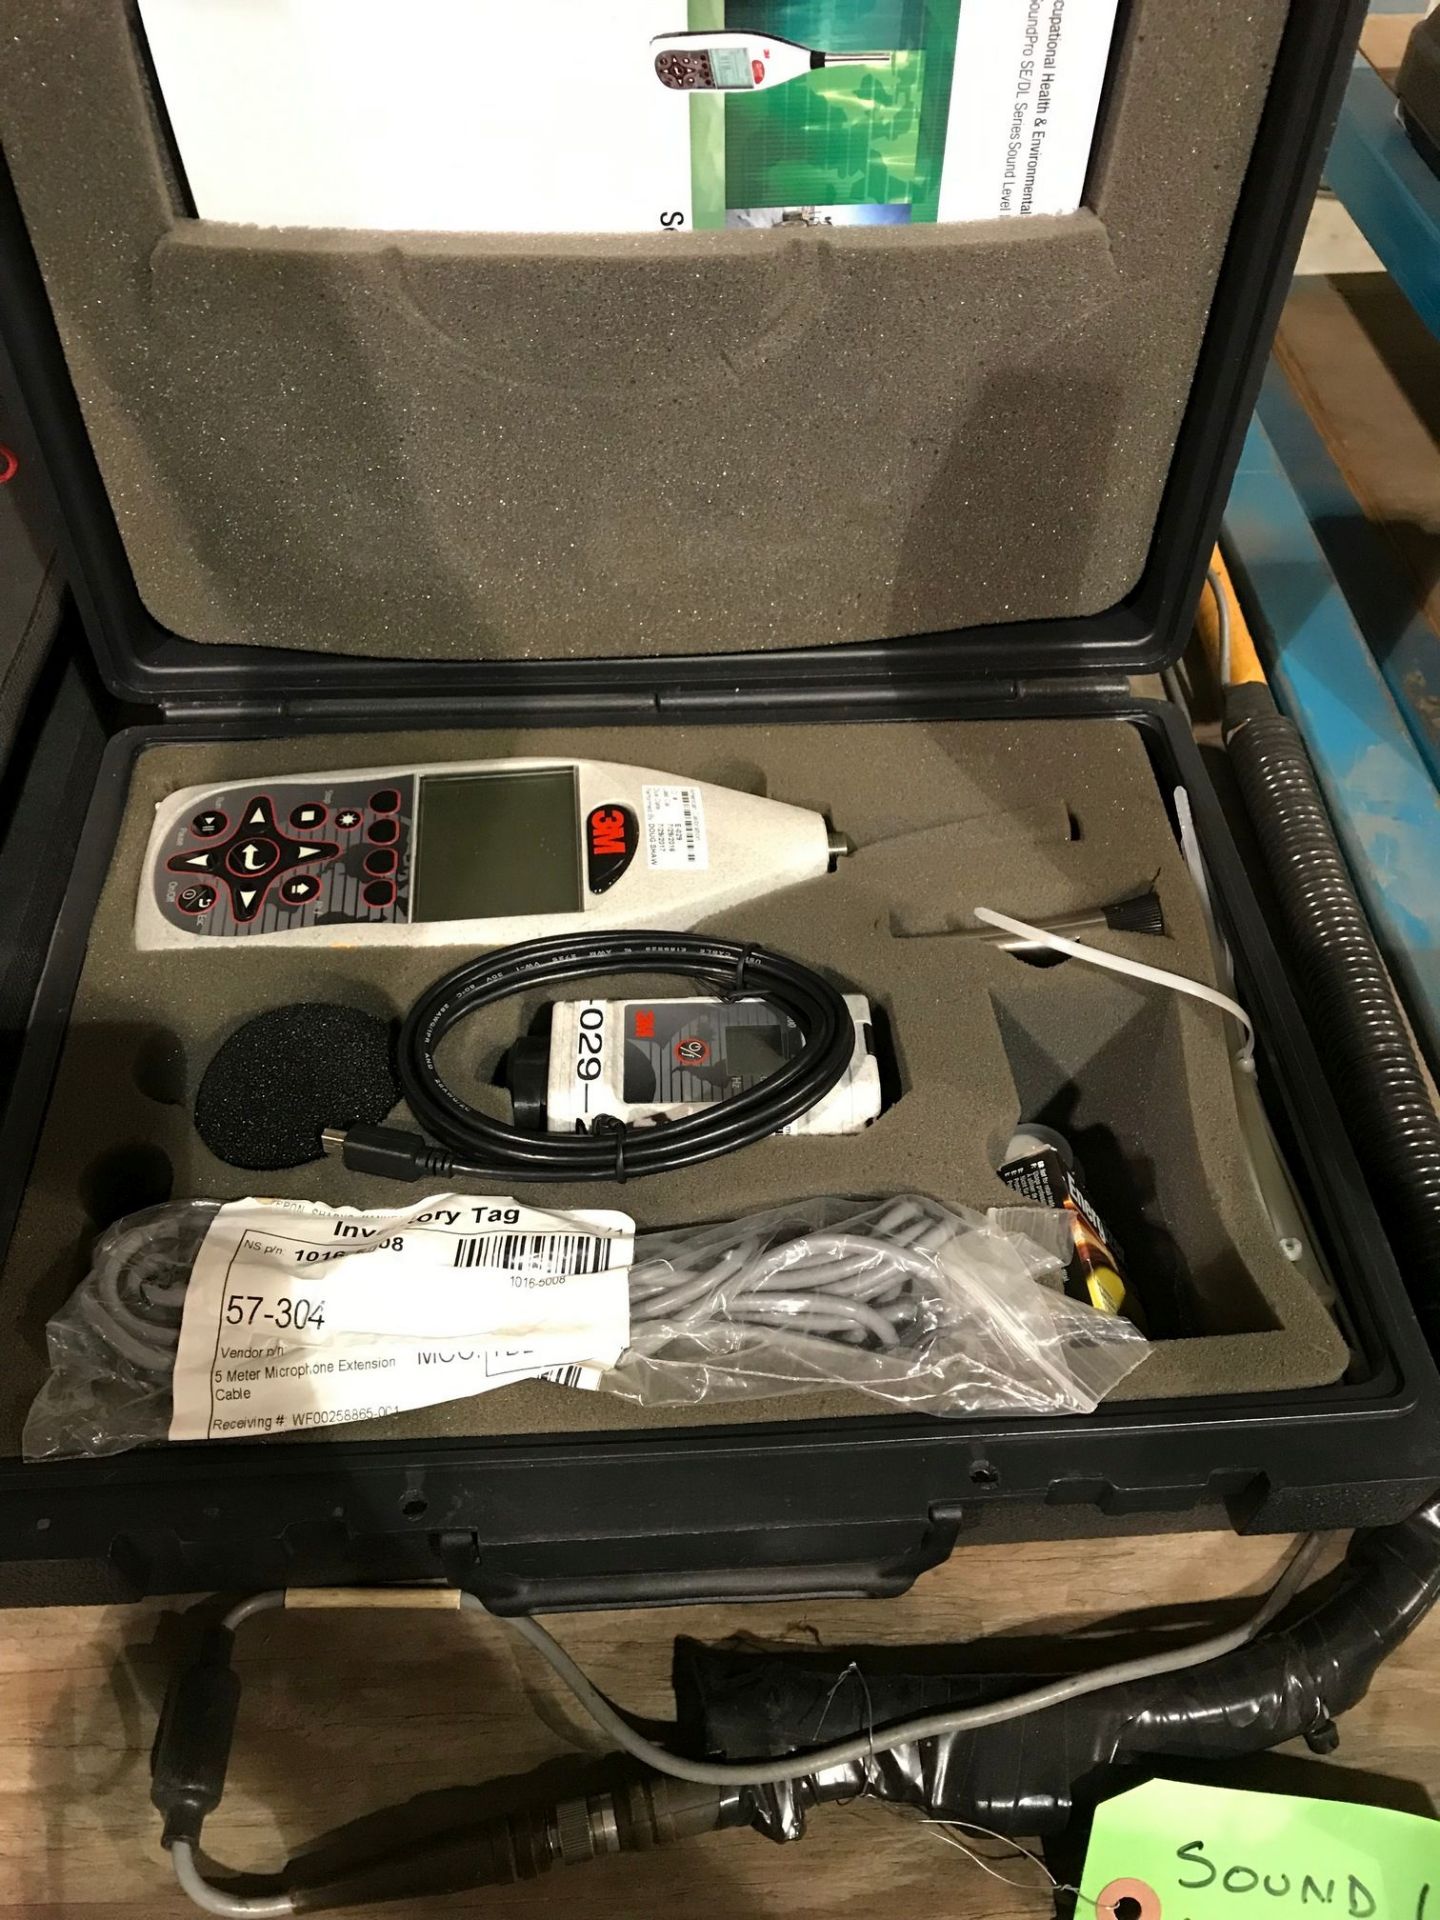 (LOT) ASSORTED METERS INCLUDING 3M SOUND PRO SOUND LEVEL METER (FA 60028), DWYER 485B DIGITAL - Image 4 of 13